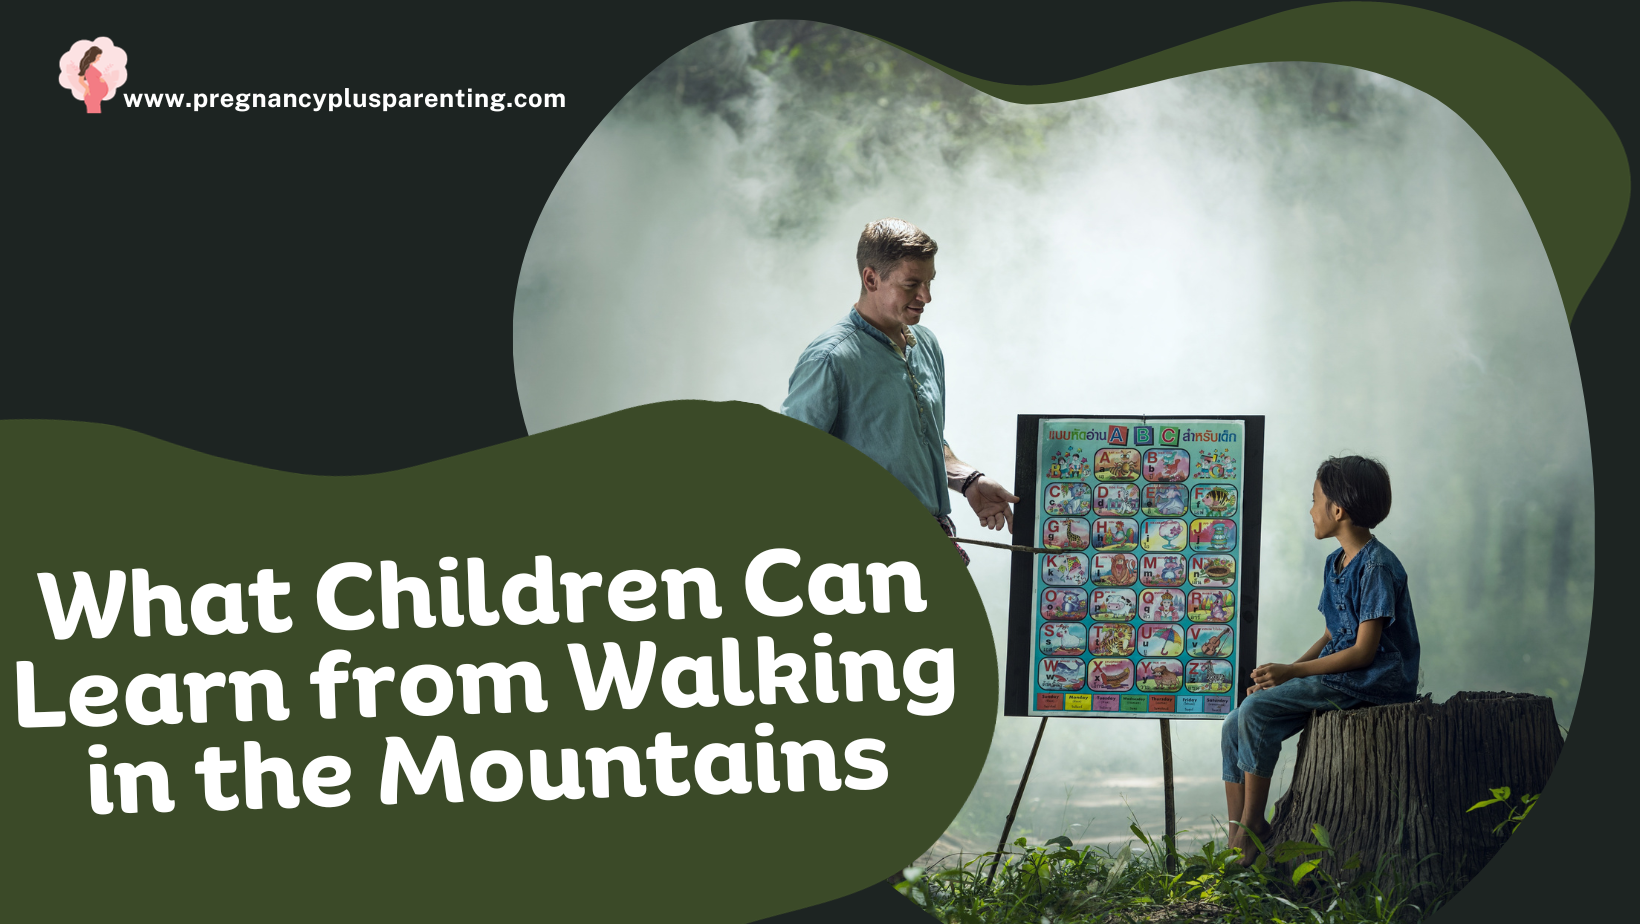 What Children Can Learn from Walking in the Mountains